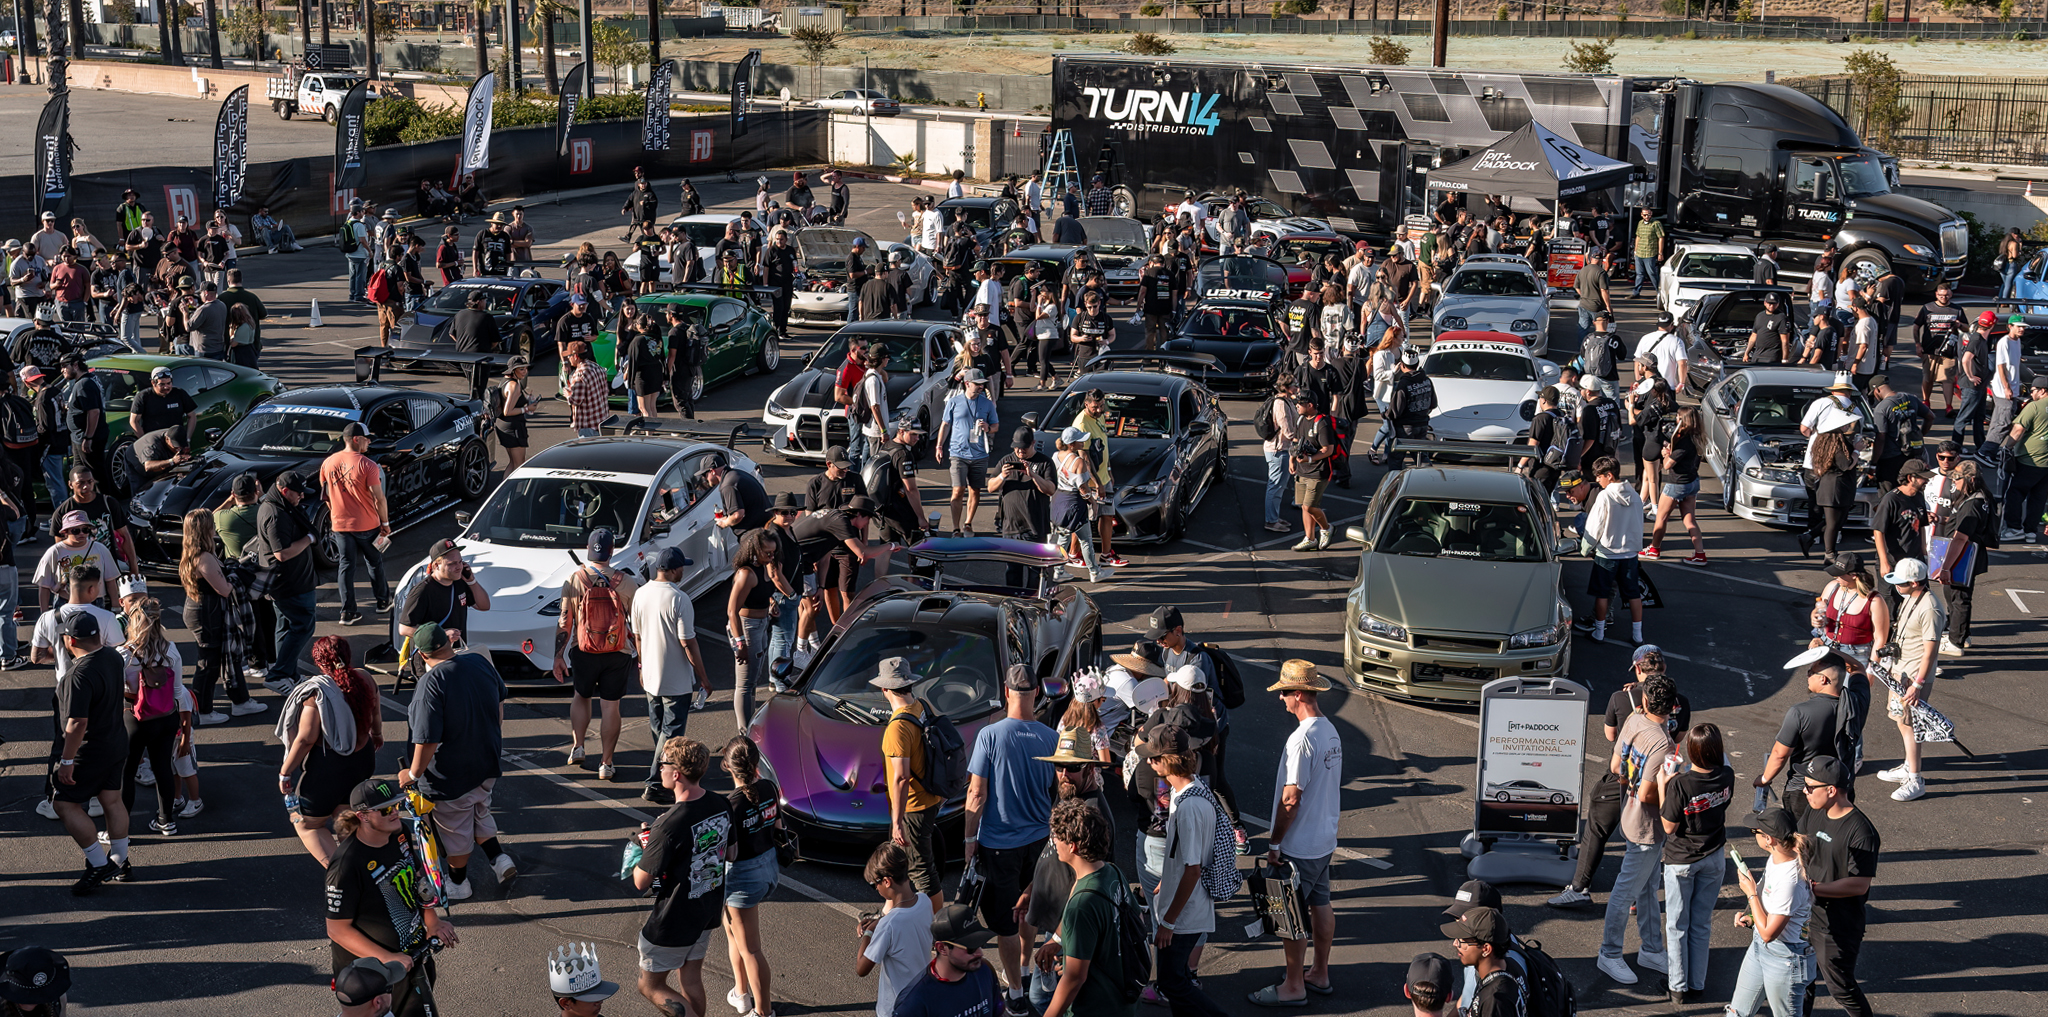 Tuner events where you're 'On the edge of that limit' showcased